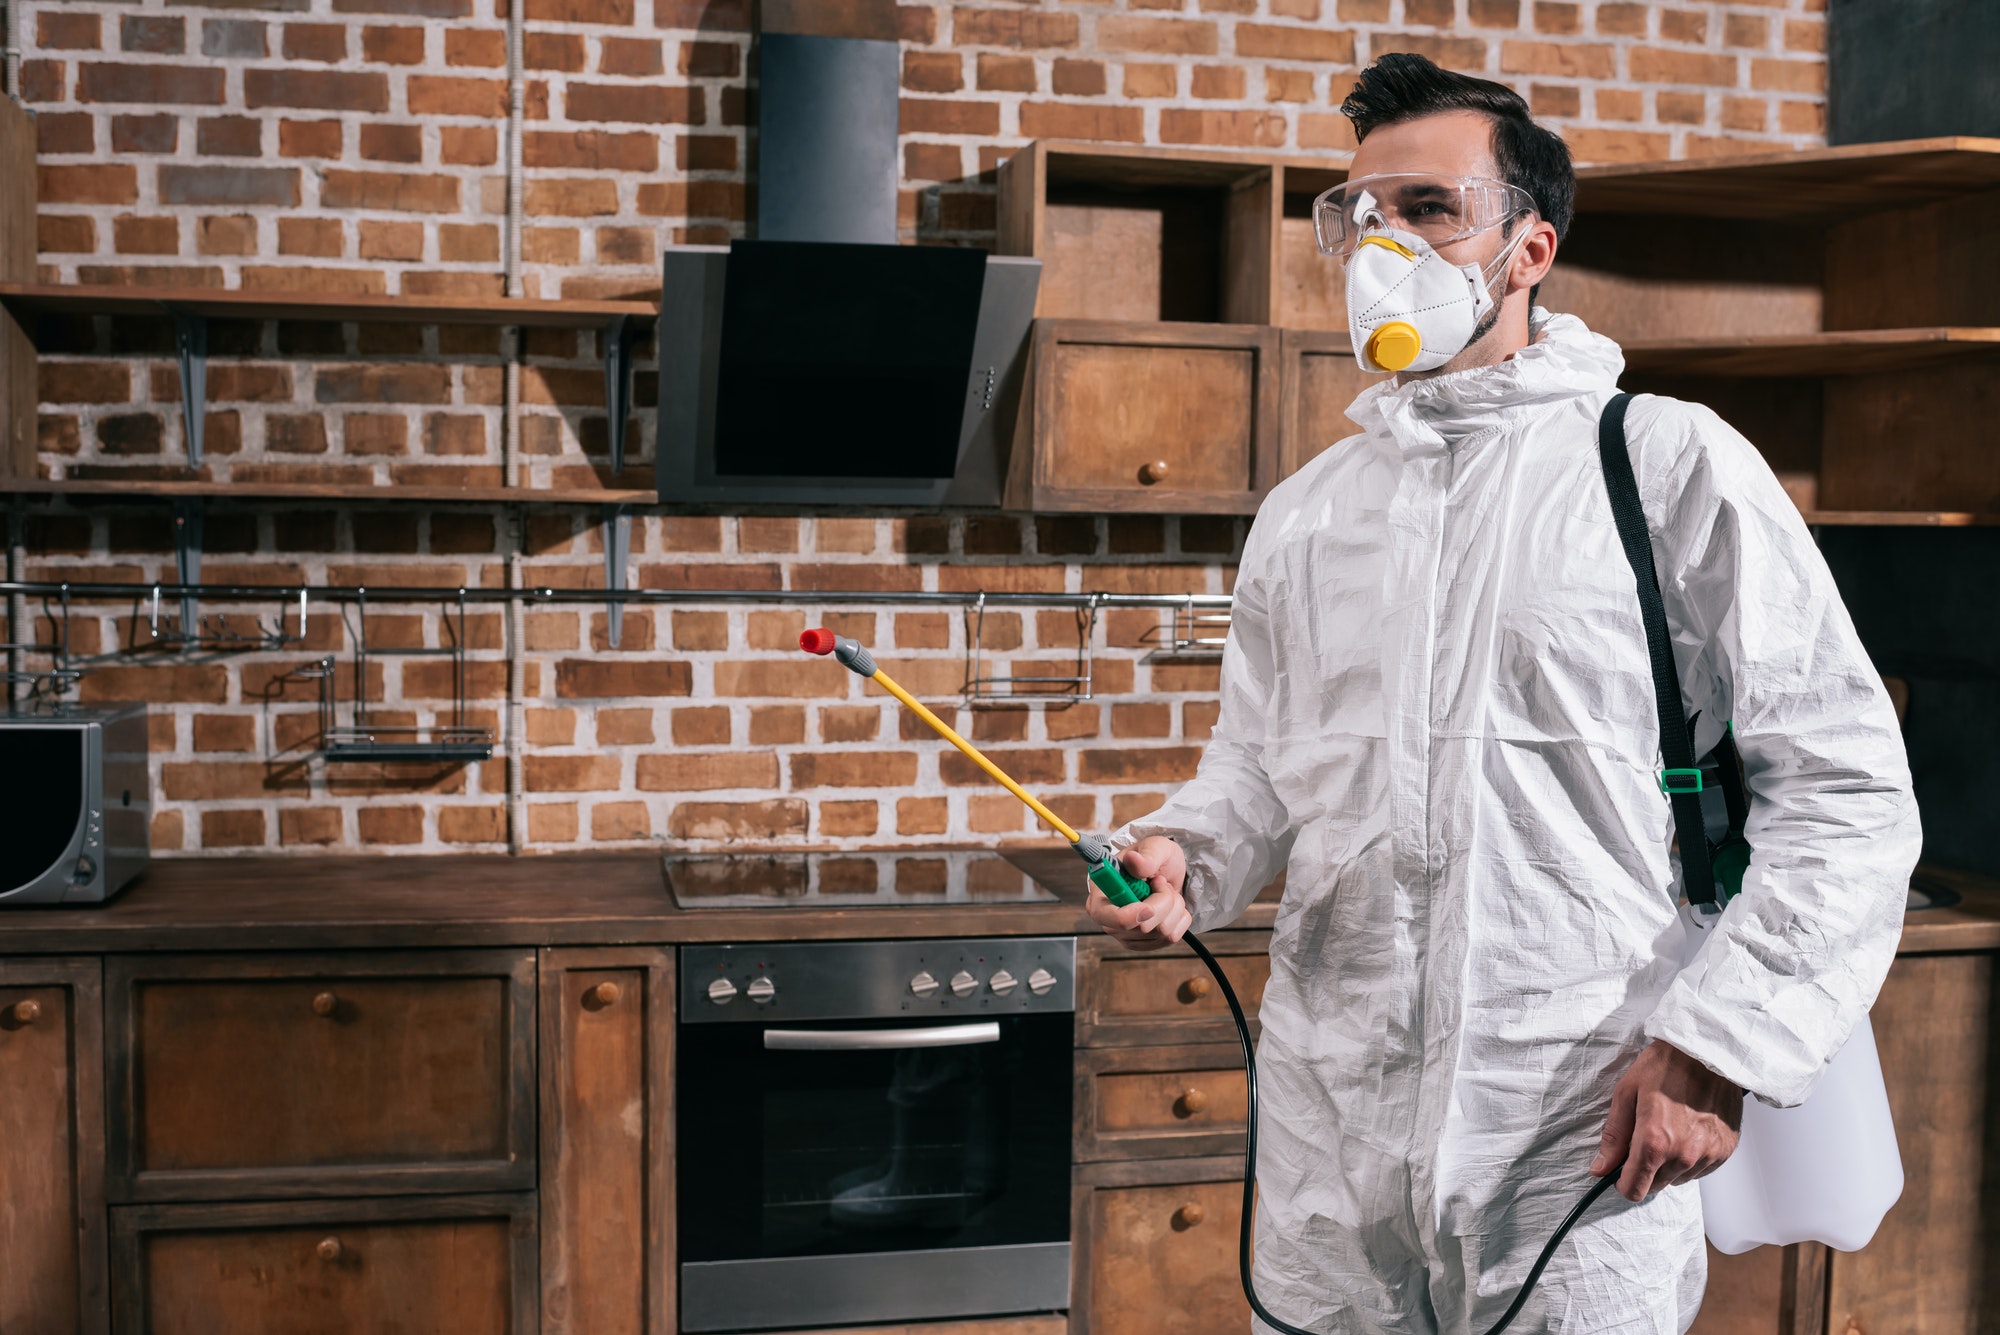 side-view-of-pest-control-worker-standing-with-sprayer-in-kitchen.jpg